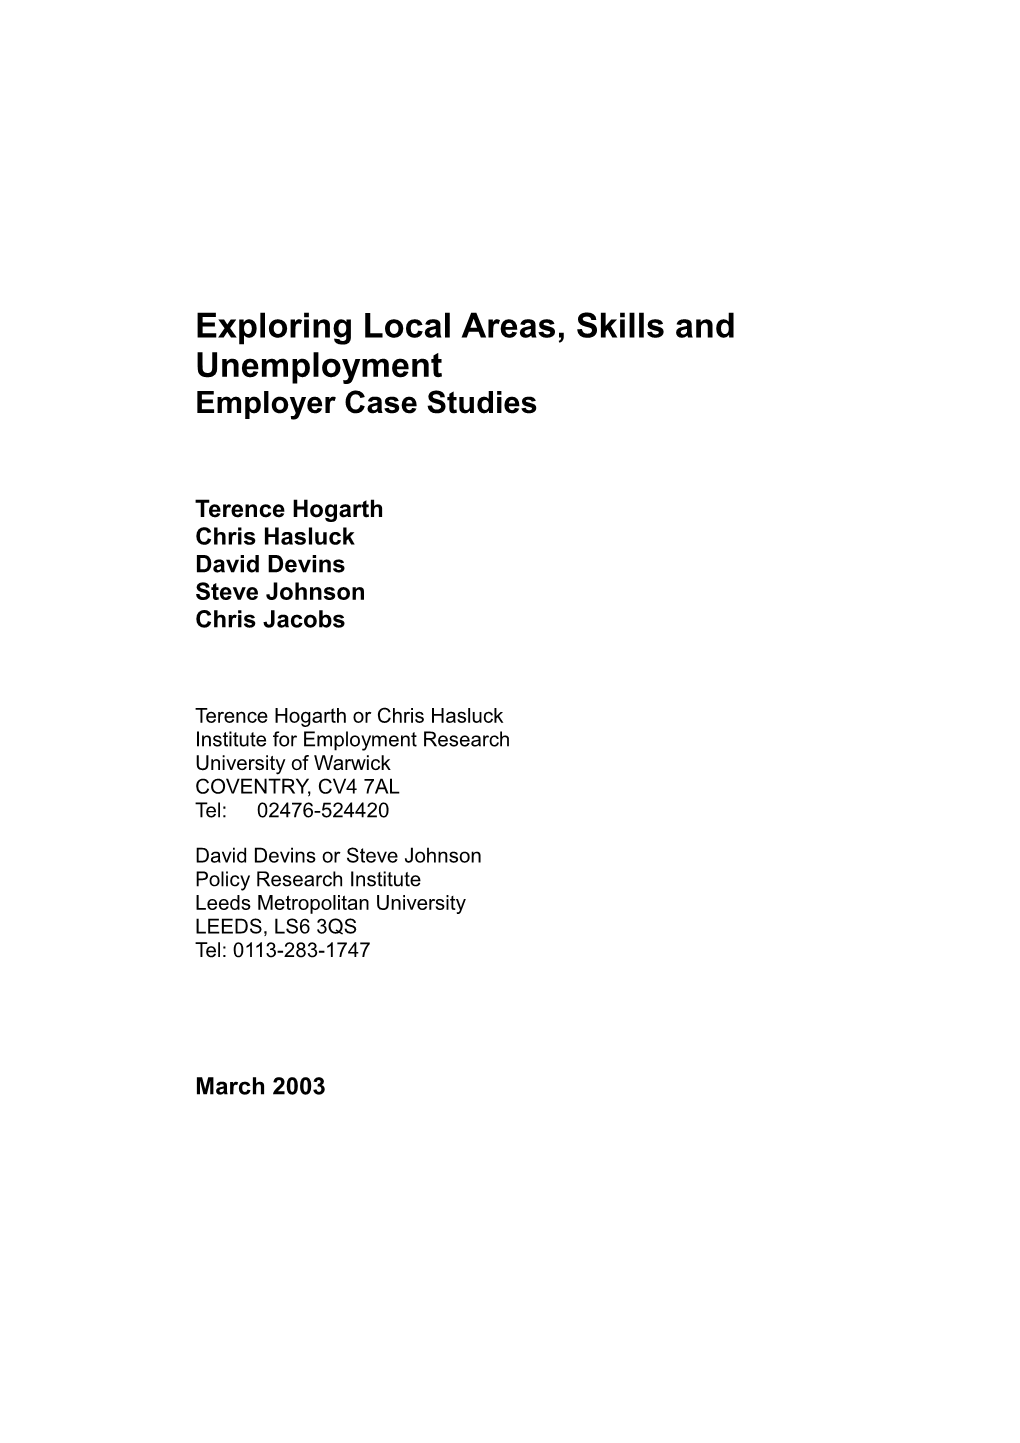 Skills, Local Areas, and Unemployment